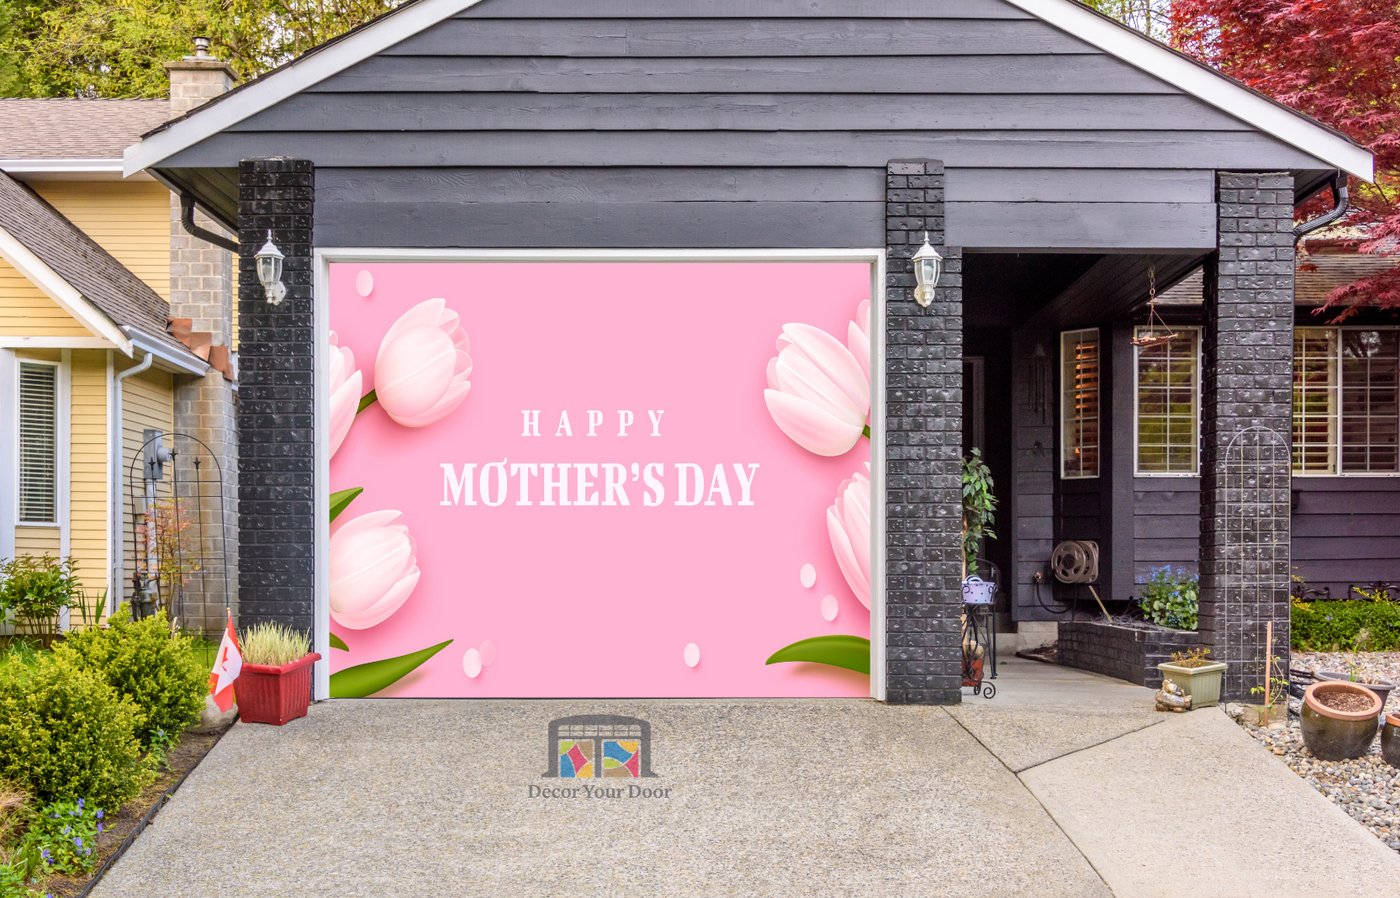 Happy Mother's Day Pink Backdrop With Flowers Garage Door Cover Banner Backdrop